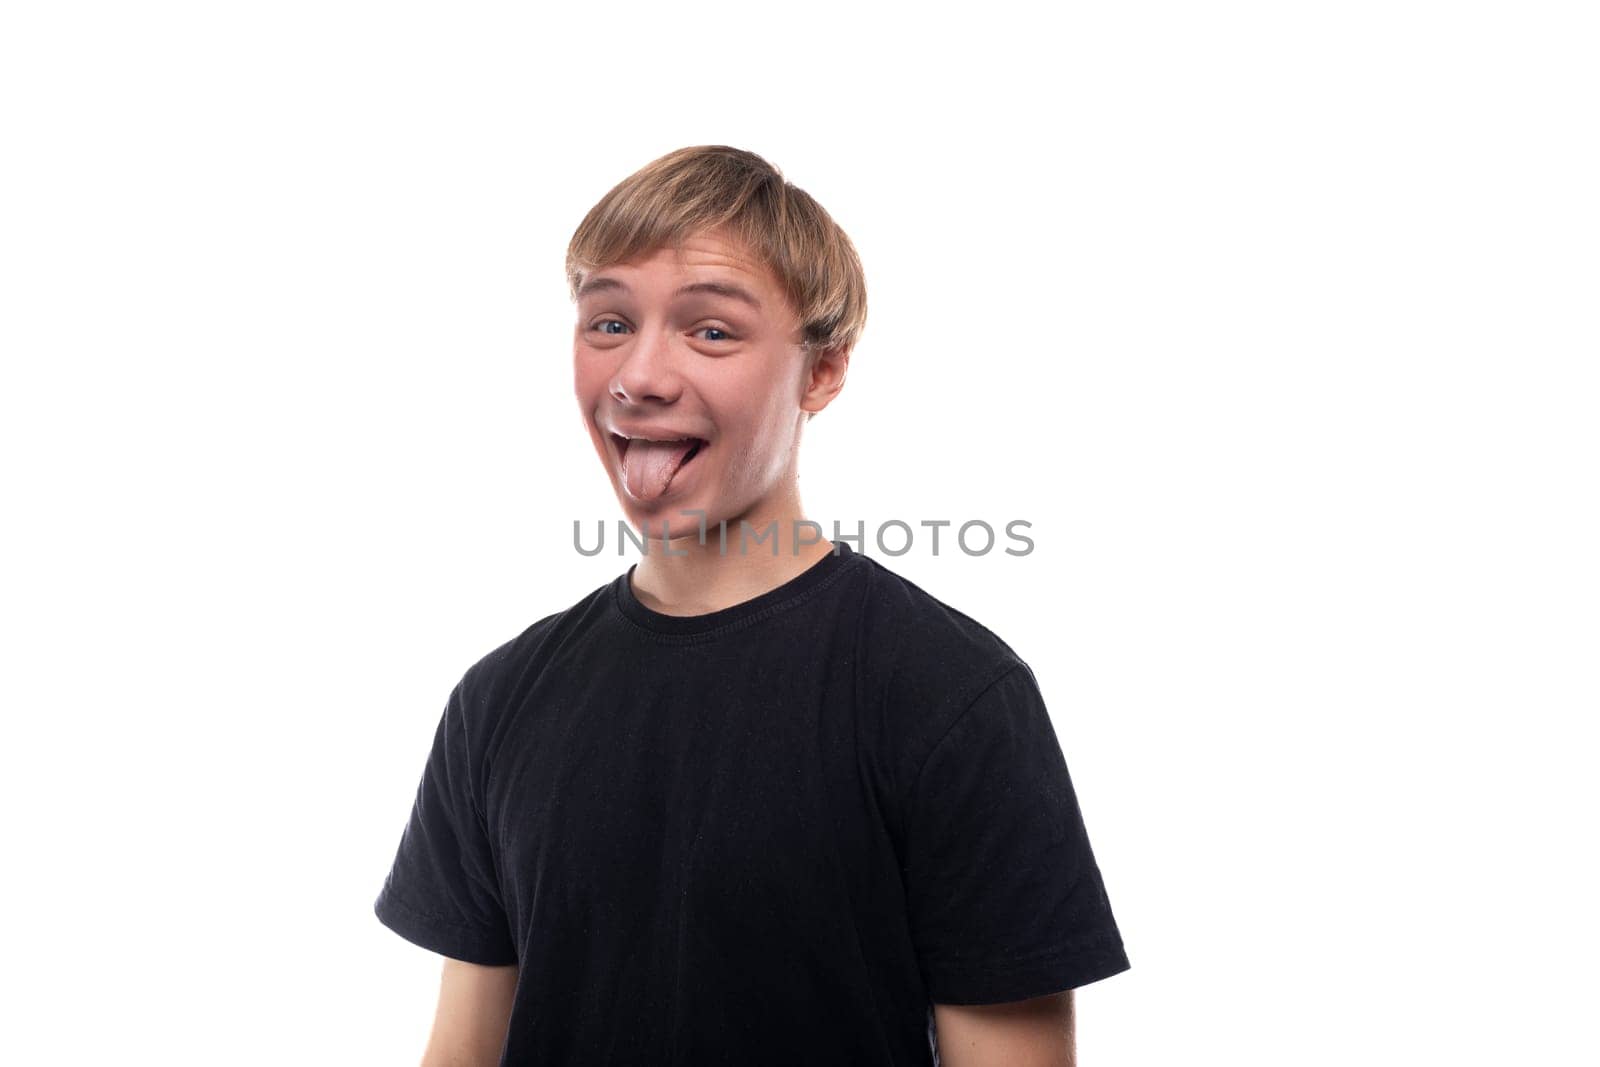 Funny fair-haired teenager guy in a black T-shirt shows his tongue.